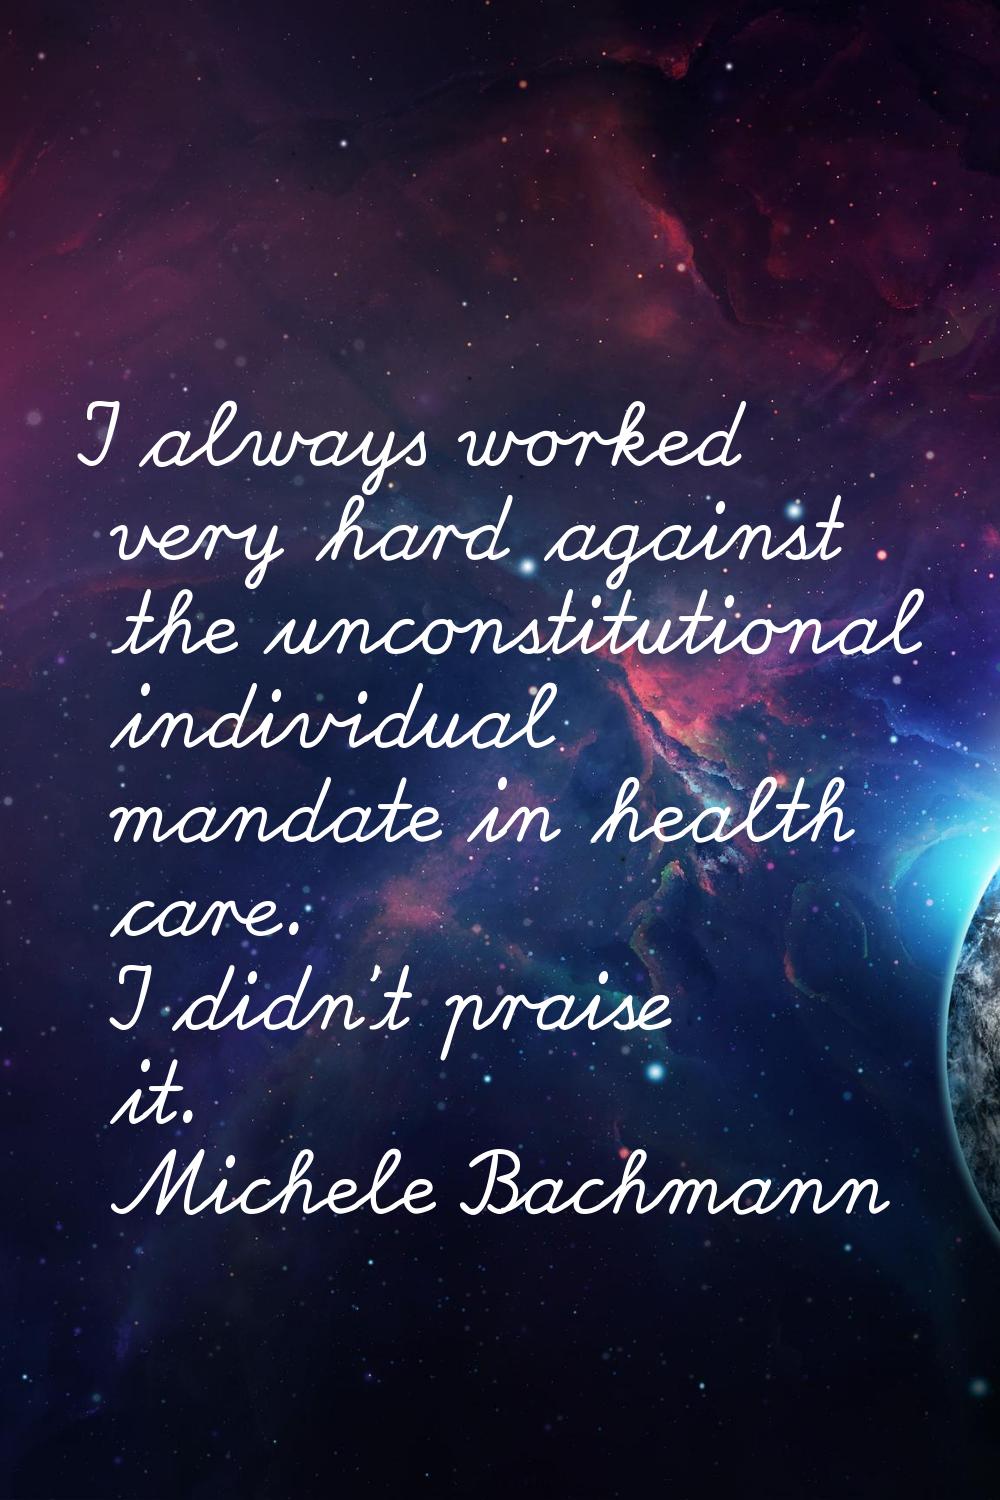 I always worked very hard against the unconstitutional individual mandate in health care. I didn't 